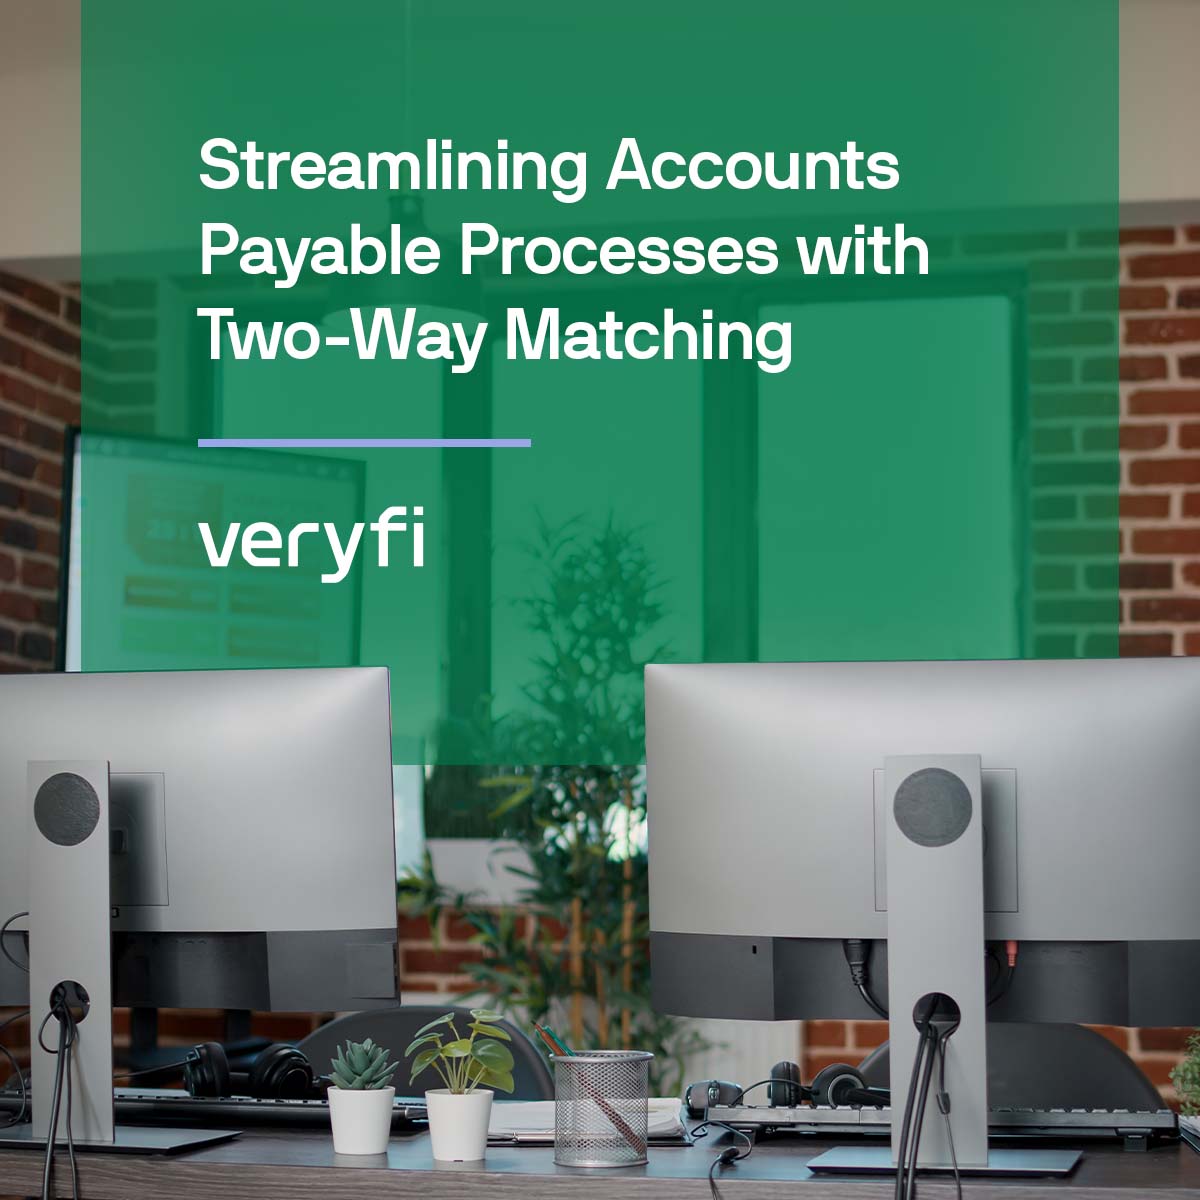 Streamlining Accounts Payable Processes with Two-Way Matching